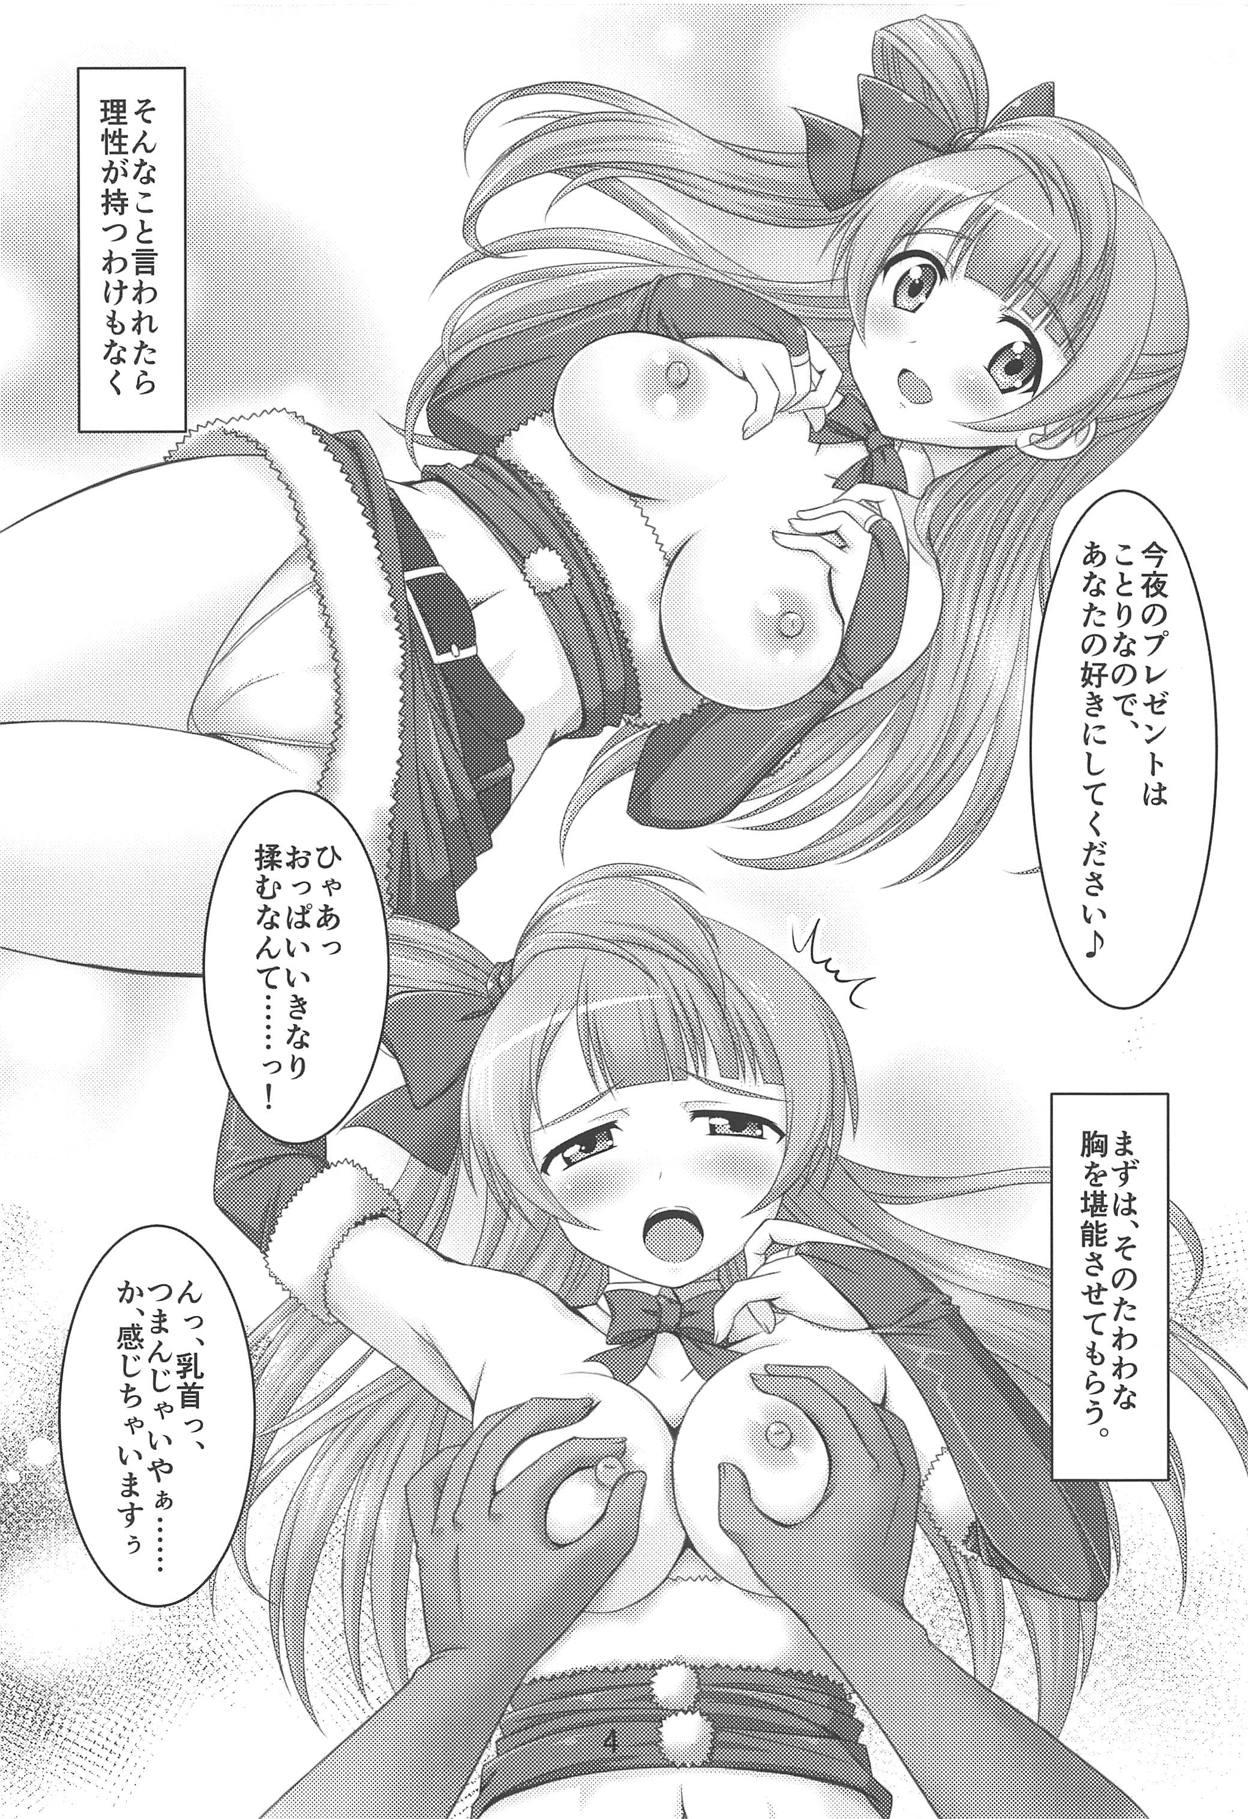 Thong Kotori to Asa made Issho 3 - Love live Oral Sex Porn - Page 3